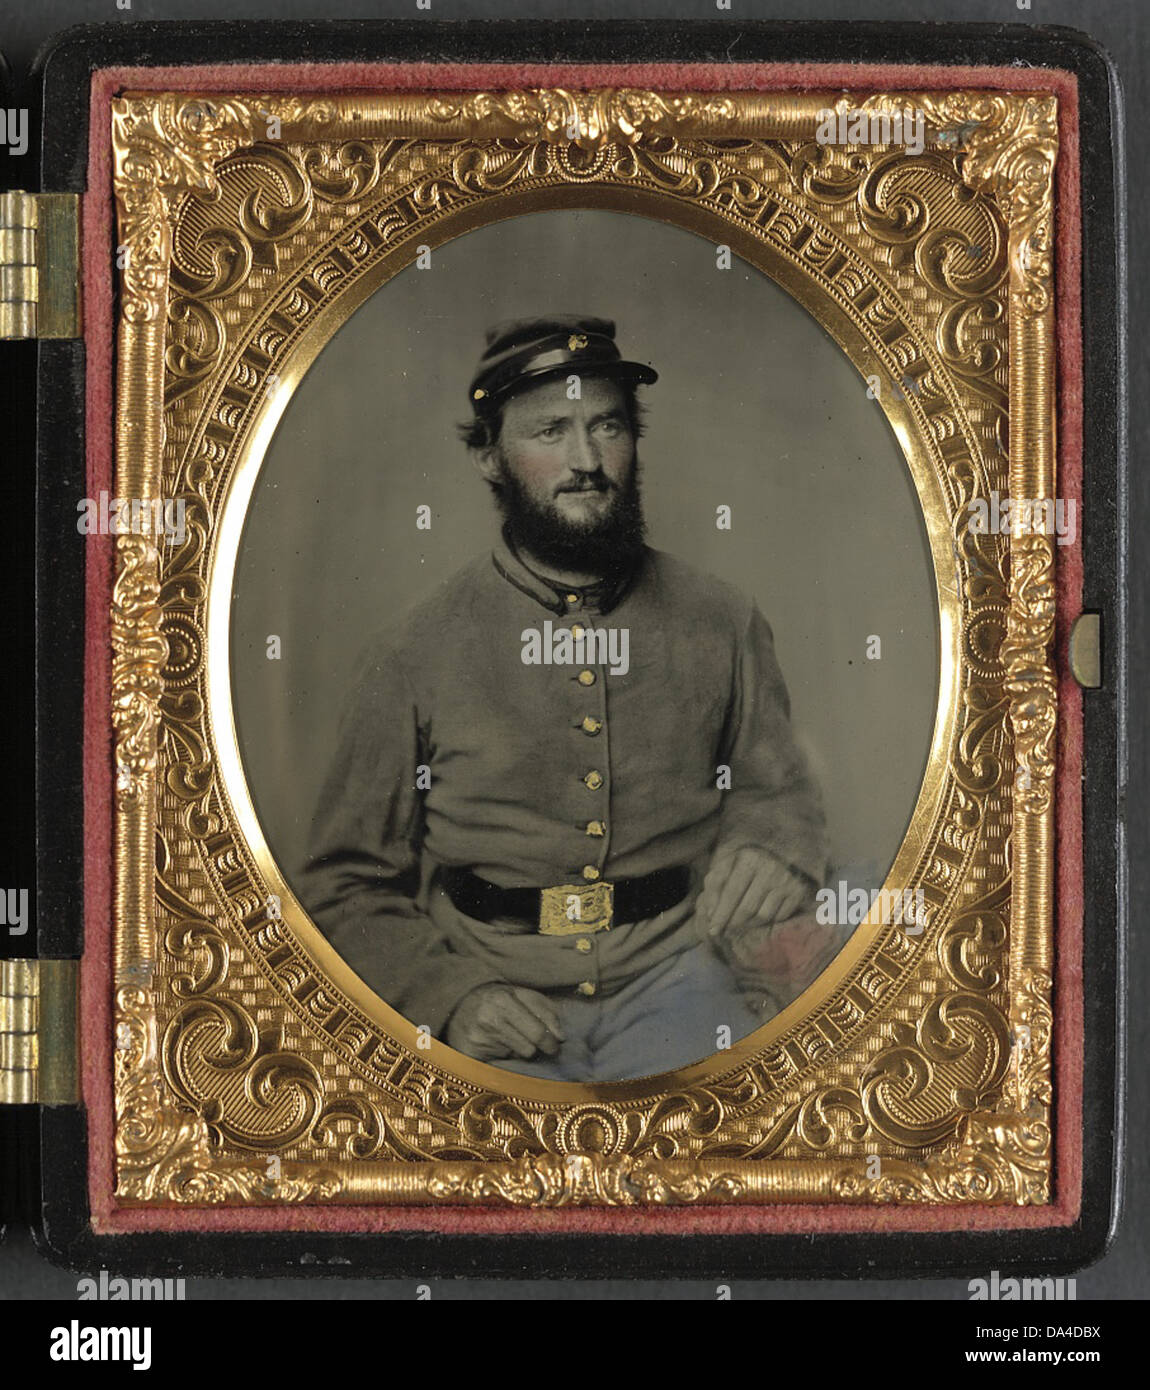 [Private Raymond Gause or Gouse of Co. B, 22nd Pennsylvania Cavalry Regiment, in uniform] (LOC) Stock Photo